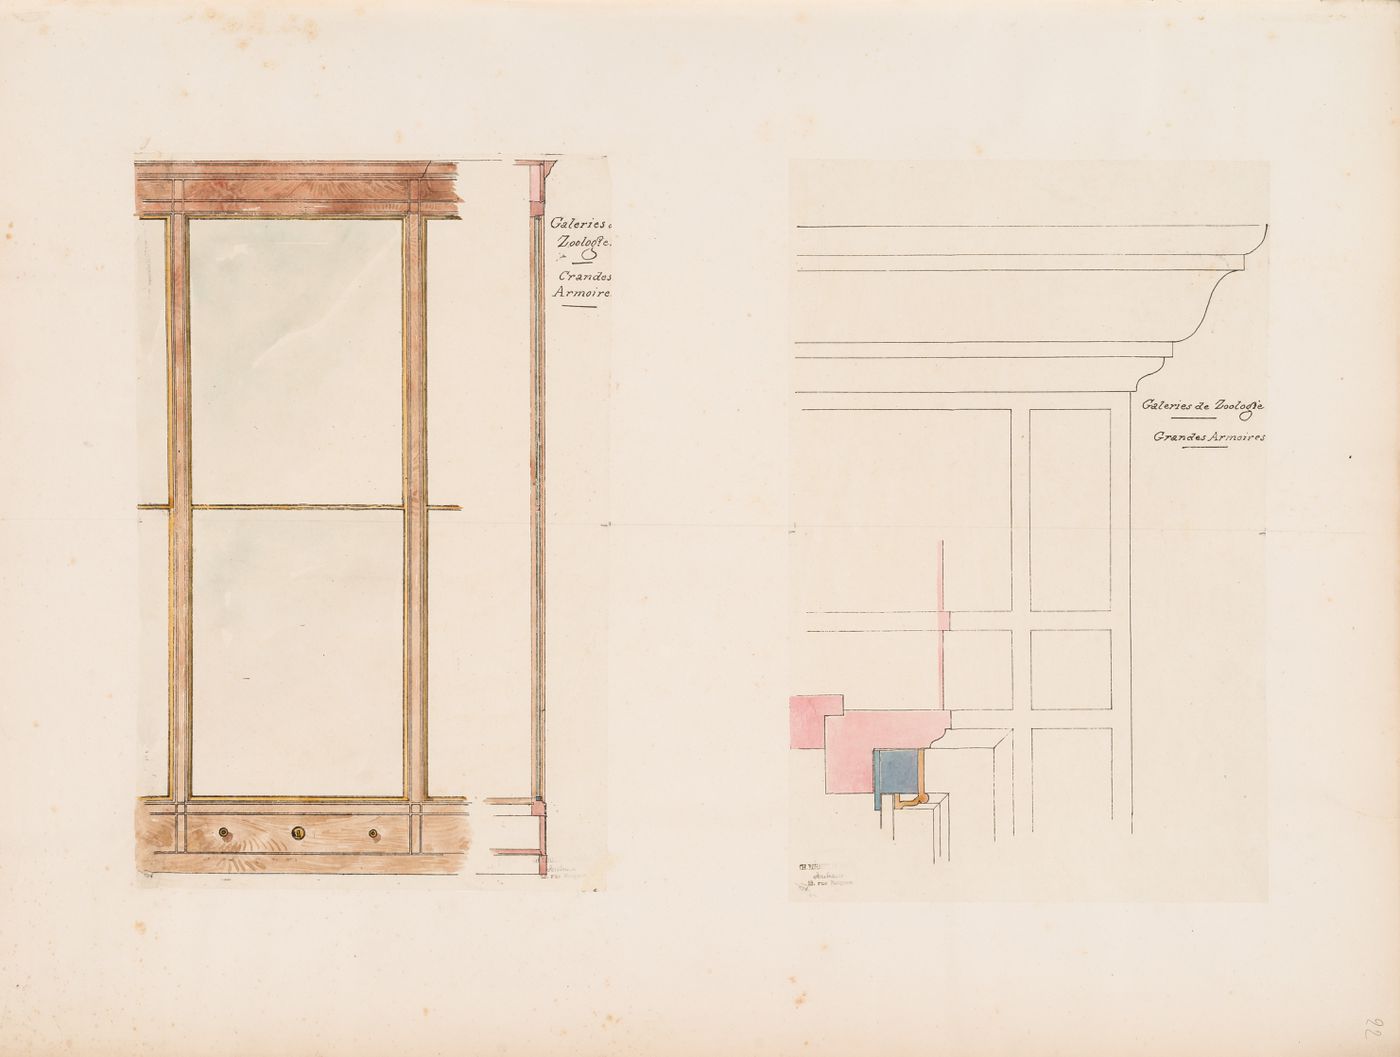 Project for a Galerie de zoologie, 1846: Partial section, plan and elevations for the large display cabinets